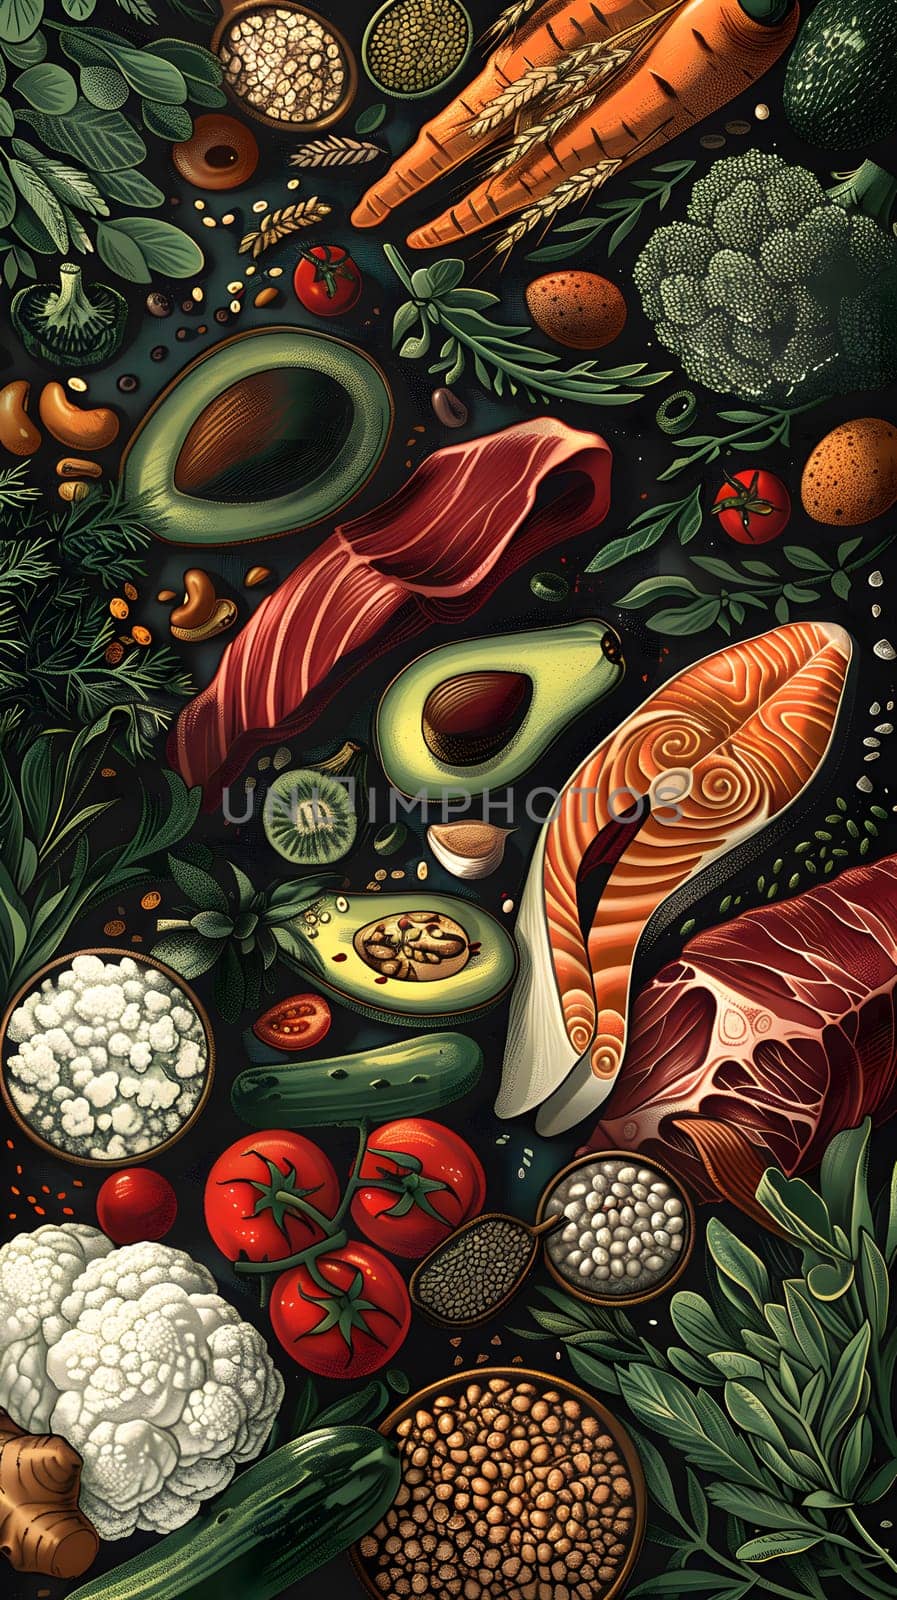 a painting of a variety of fruits and vegetables by Nadtochiy